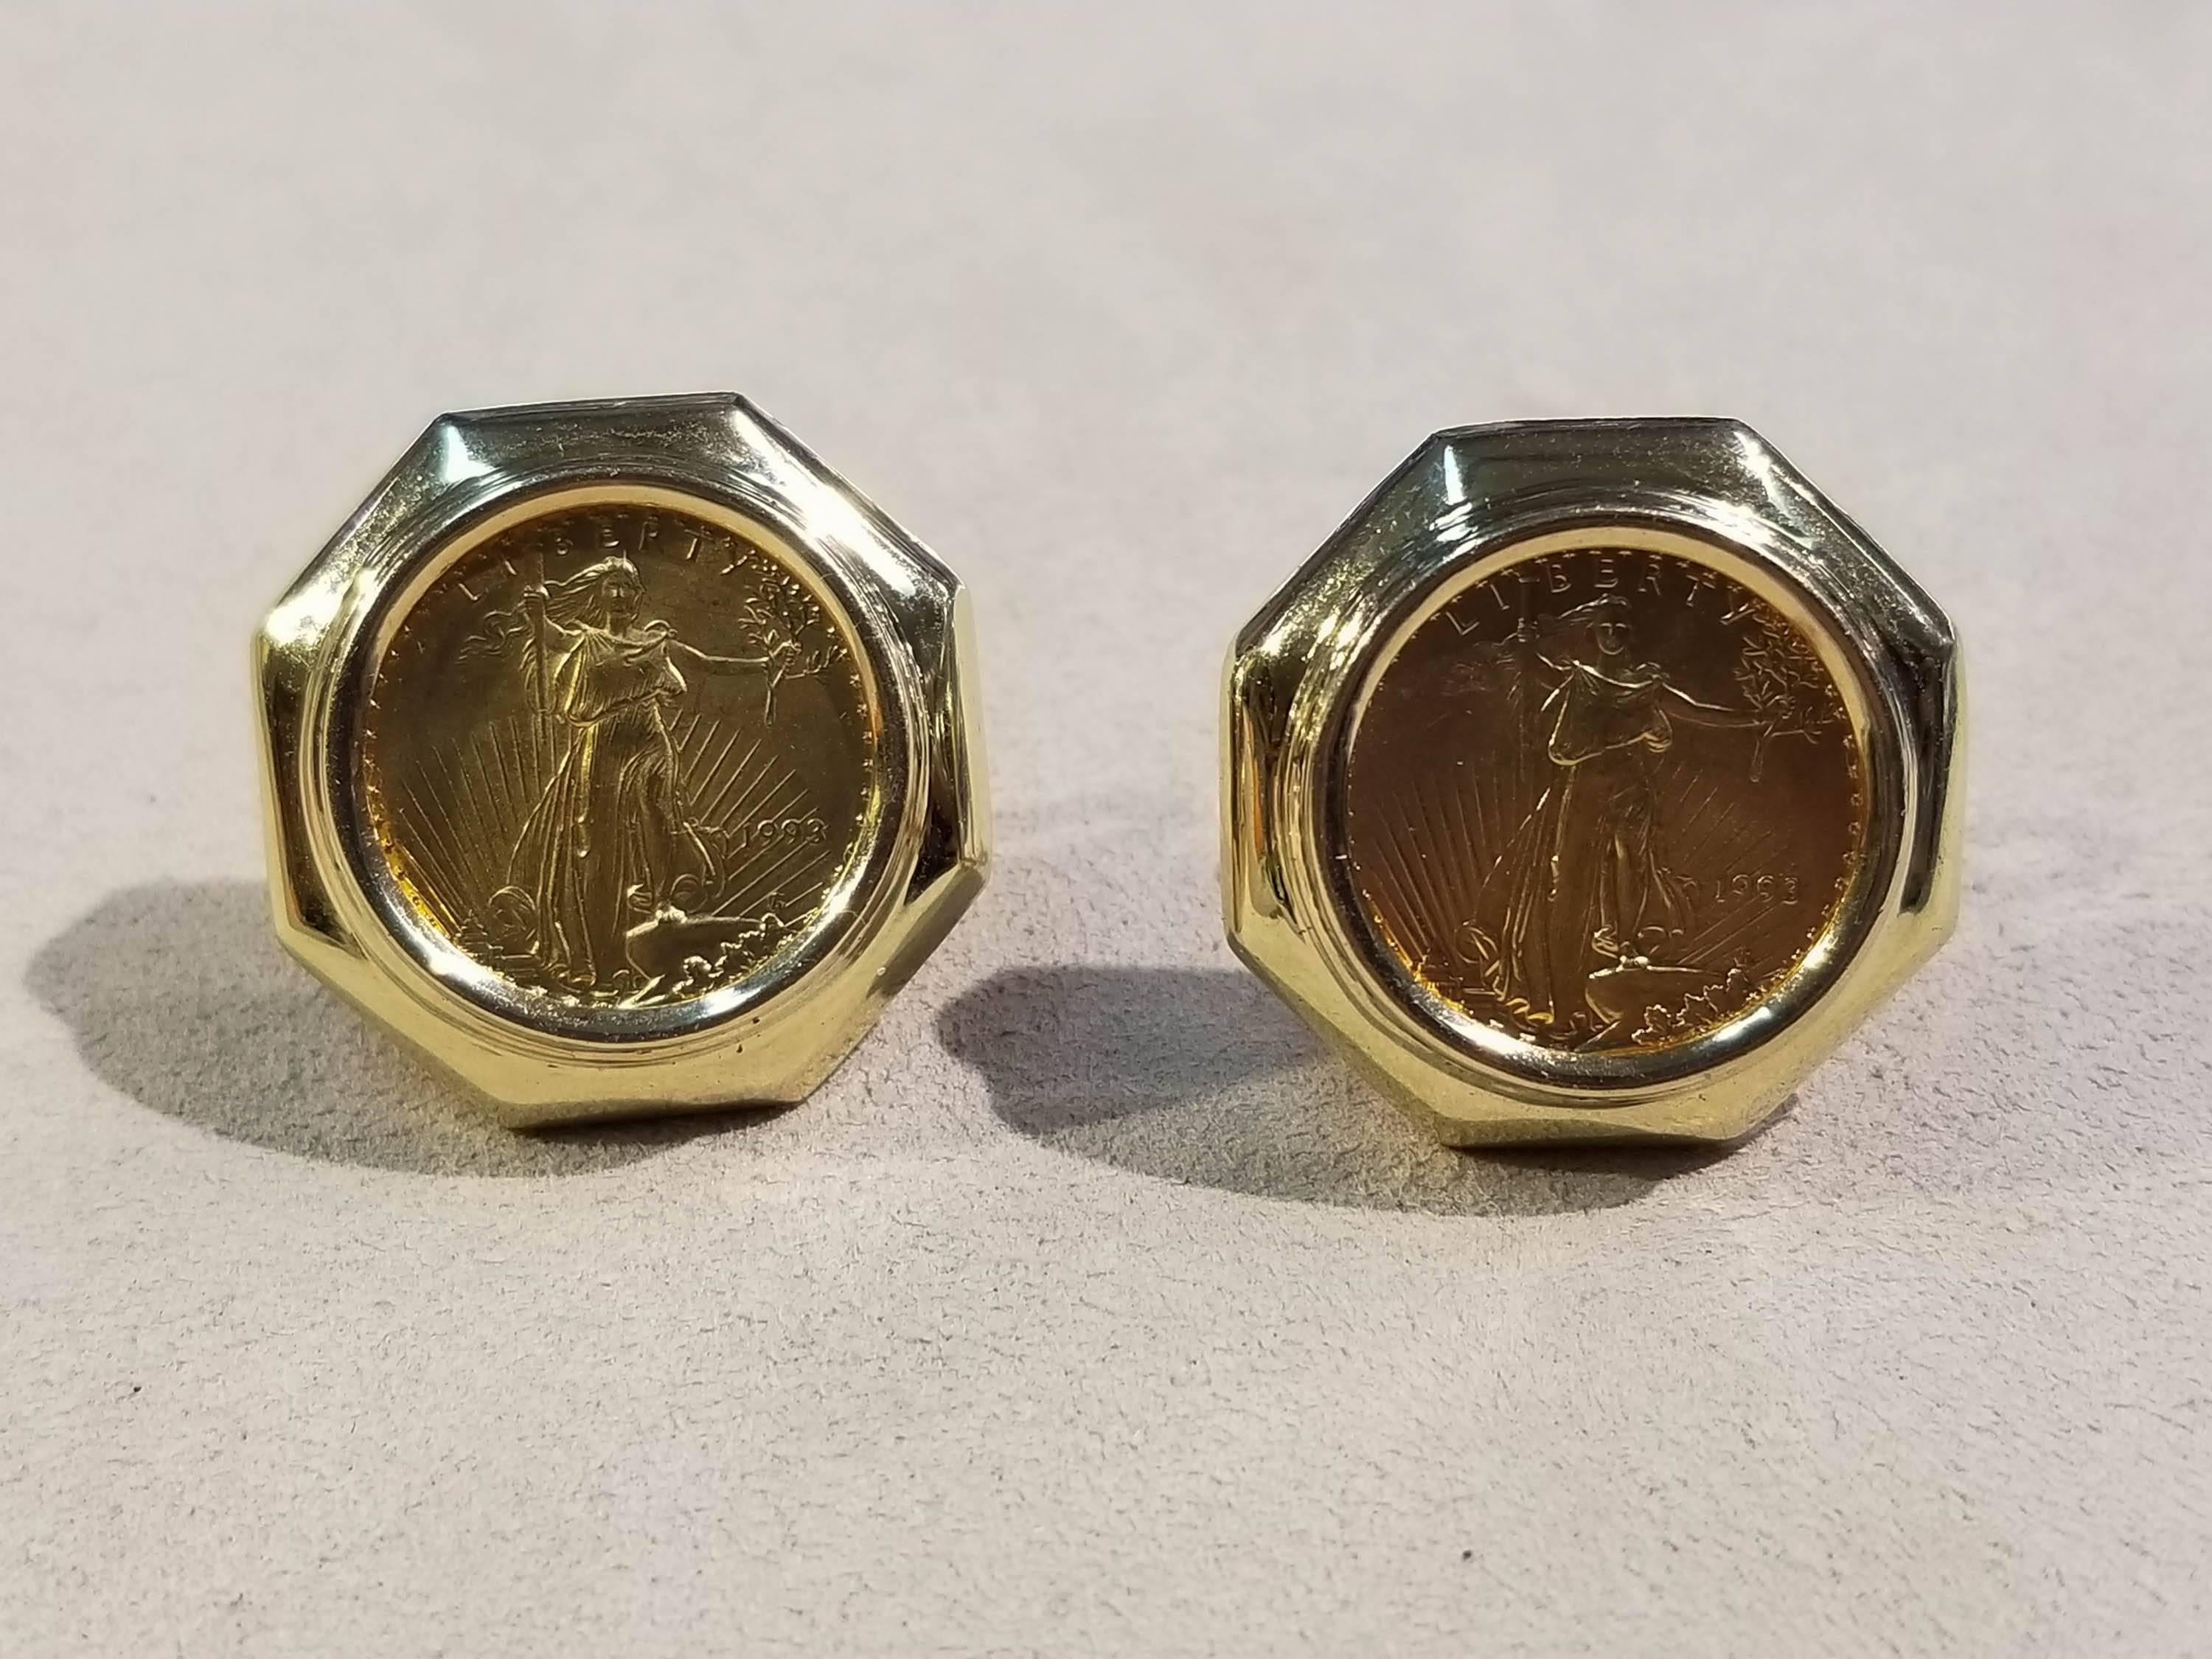 $5 Gold Coin Earrings, 22kt US 1993.
22kt Yellow Gold, $5 Gold Coins, 14kt Yellow Gold Mounting.